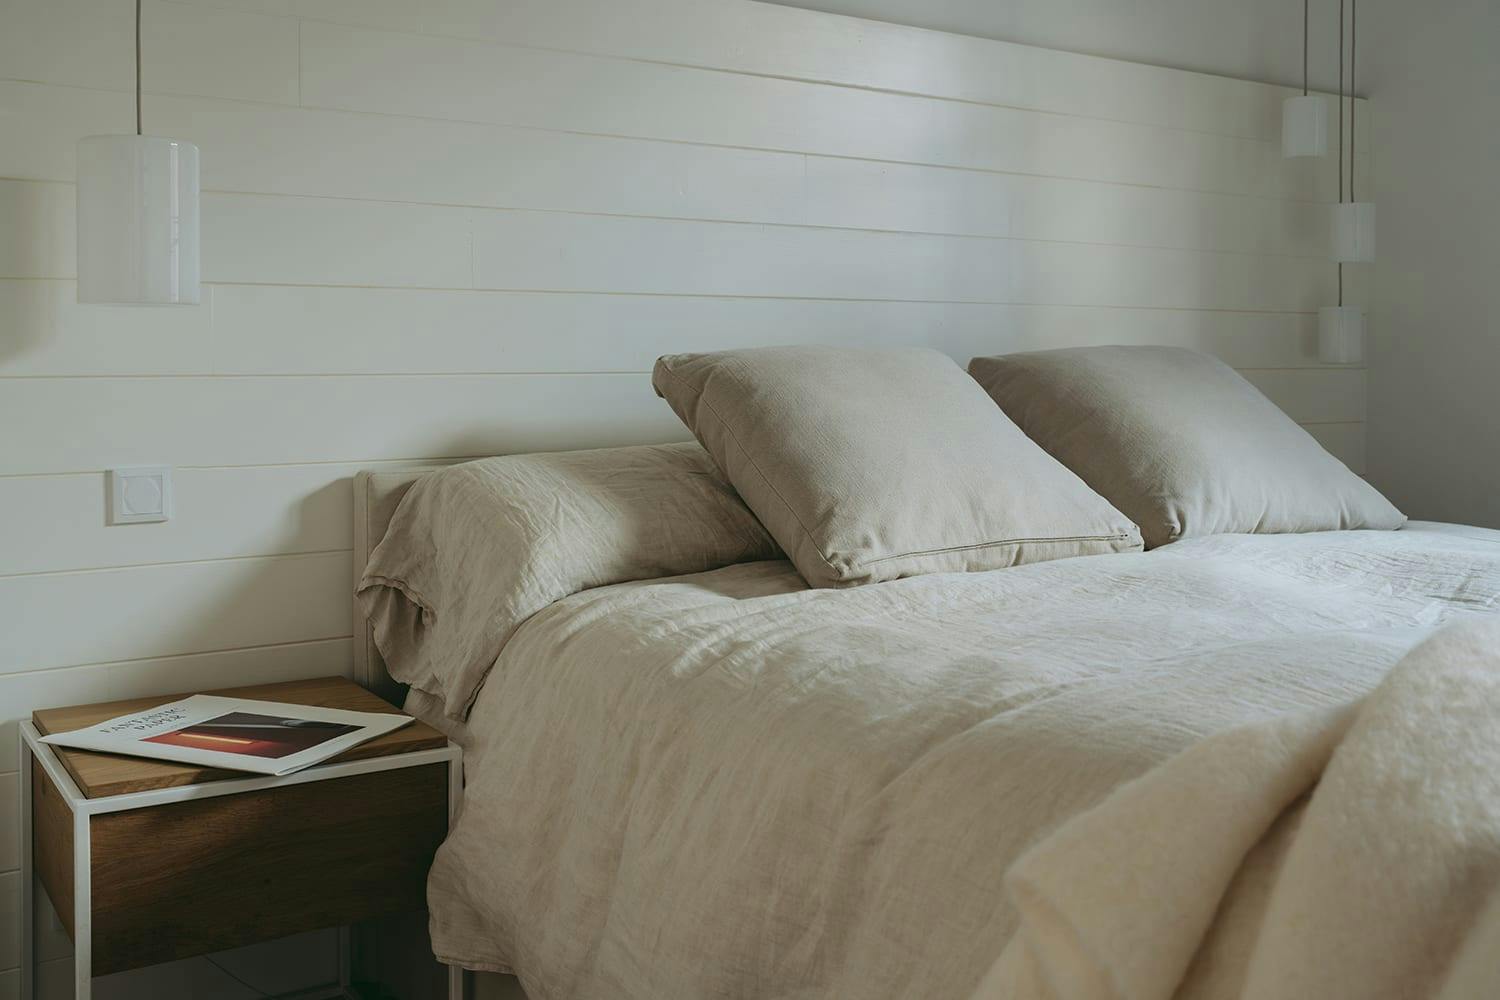 The image features a large, well-made bed with a white comforter and pillows. The bed is situated in a room with white walls, creating a clean and minimalist atmosphere. A small table is placed next to the bed, likely for holding a book or other items.

In addition to the bed and table, there are two books on the table, one closer to the left side and the other towards the right side. A remote control is also visible on the table, possibly for controlling the television or other electronic devices in the room.